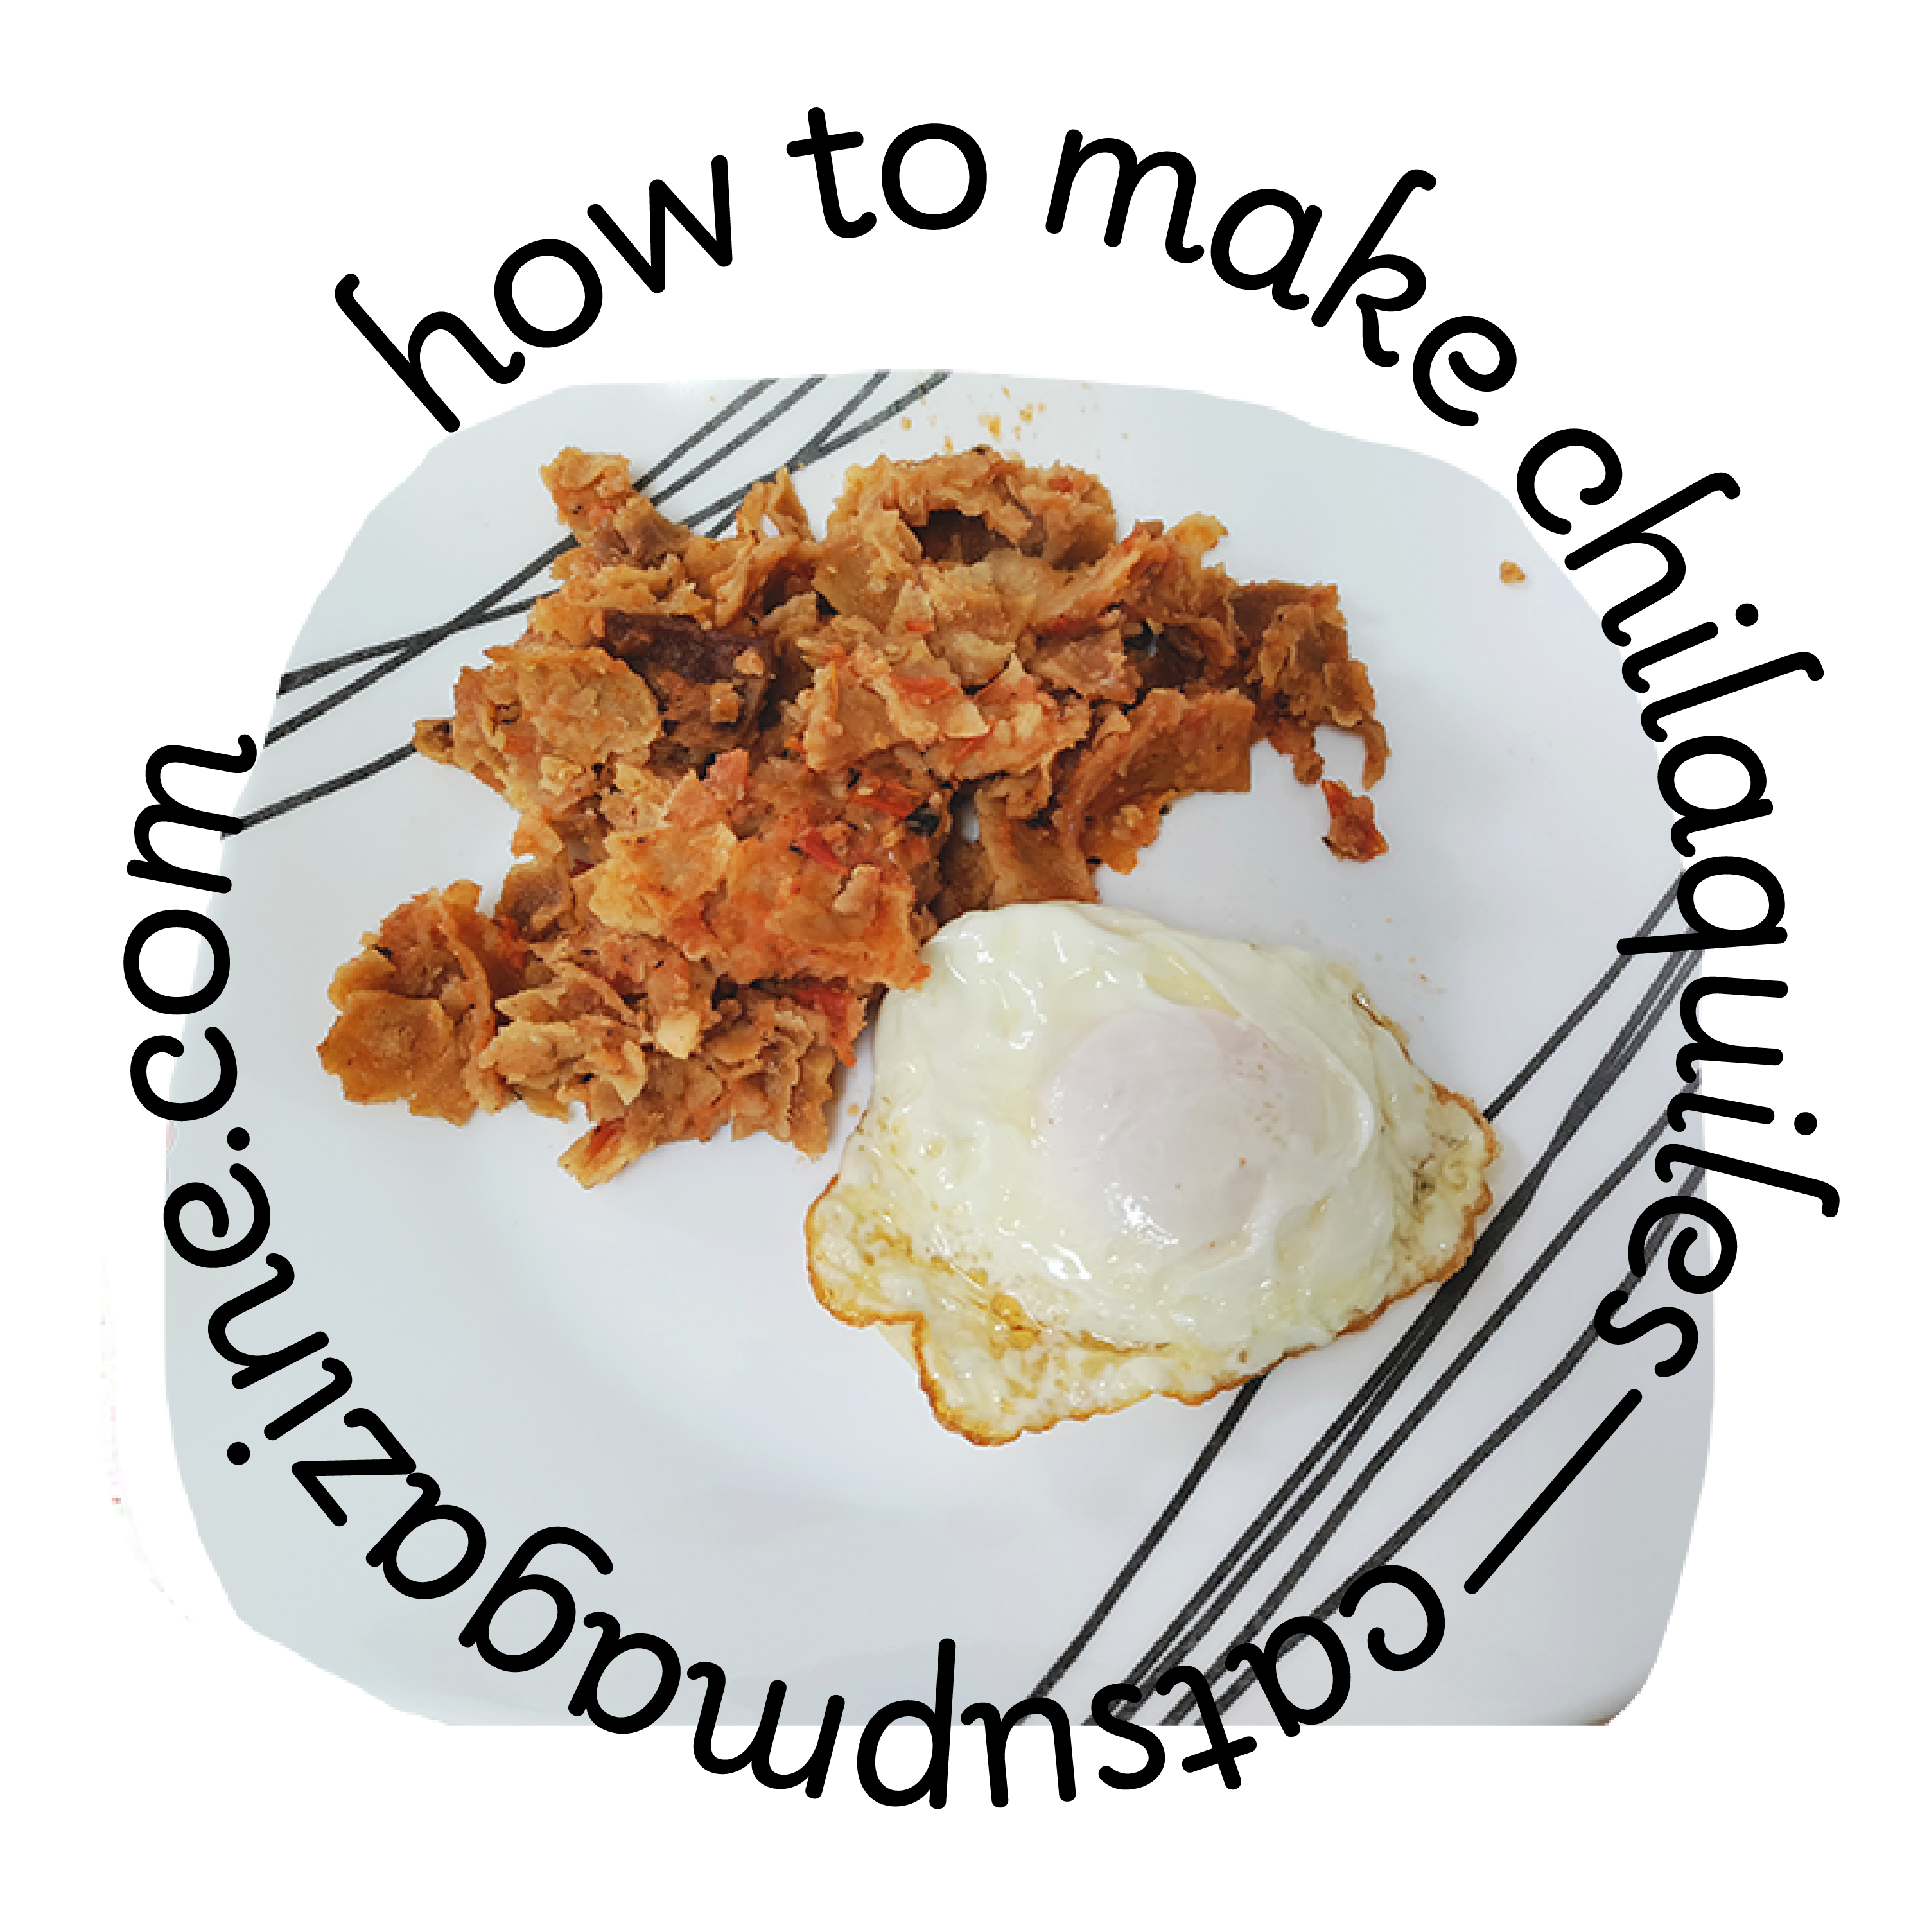 aerial view of a plate of chilaquiles next to an overmedium egg